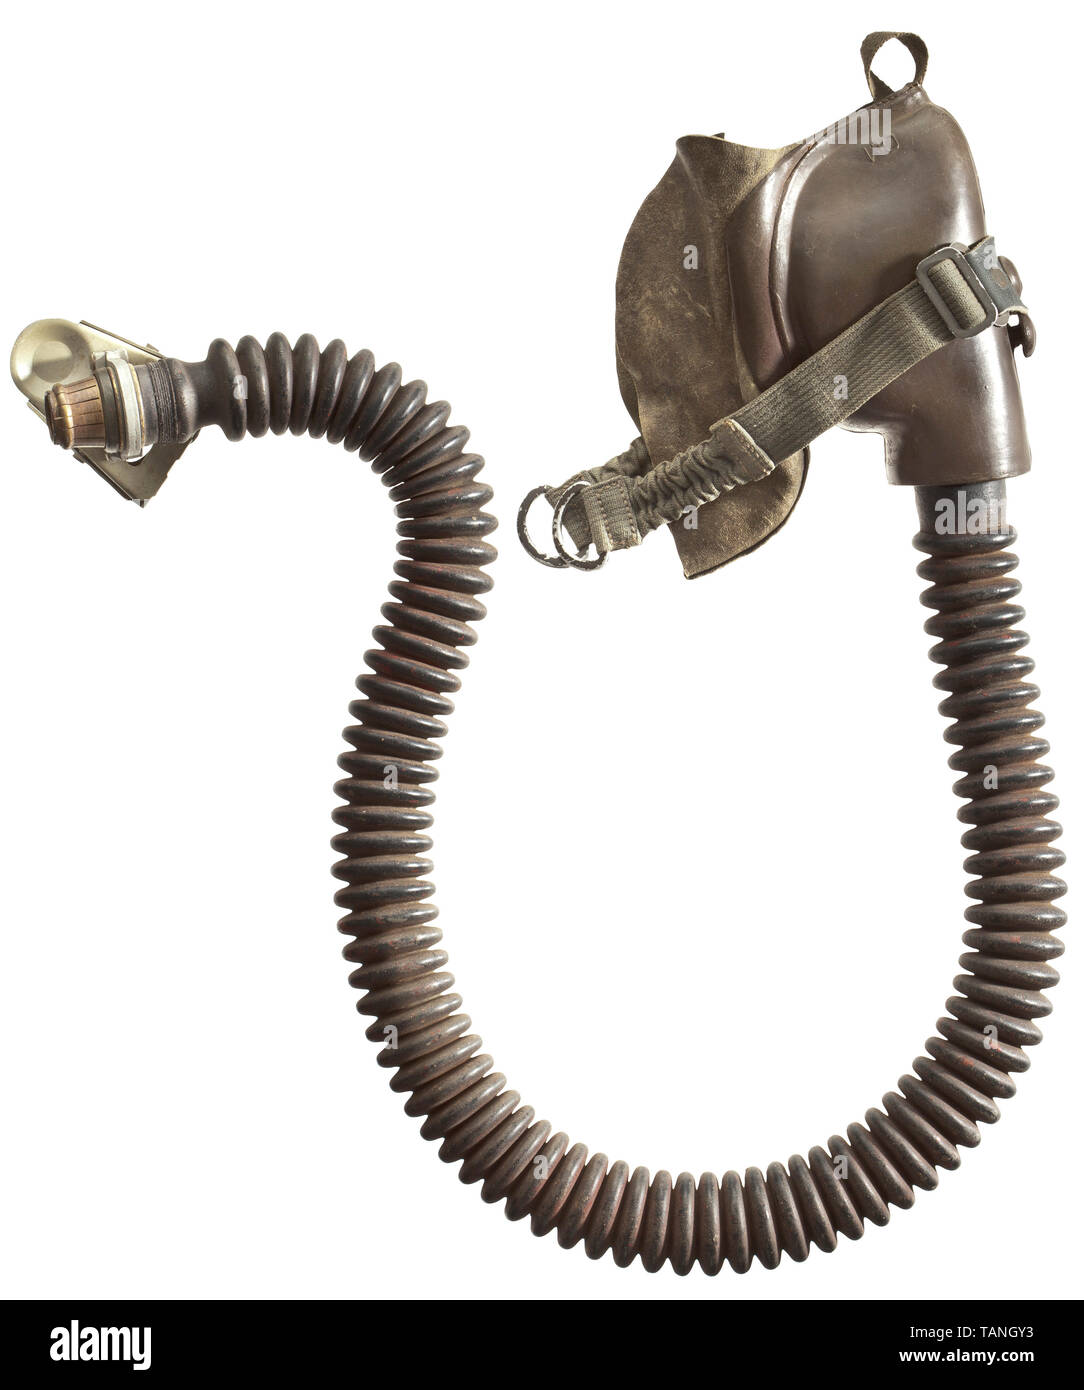 An oxygen mask for crew members, typ mod. 10-6702 (Dräger) manufactured by Auer, Berlin Rubber, leather, cloth, aluminium, steel. The mask stamped with the manufacturer's mark 'Auer 10-67' (Auer, Berlin) and 'Gr. 1' (tr. 'size 1'). Fastening straps, a metal clip (stamped 'AB') at the end of the tube. Signs of age and use. Length circa 80 cm. historic, historical, Air Force, branch of service, branches of service, armed service, armed services, military, militaria, air forces, object, objects, stills, clipping, clippings, cut out, cut-out, cut-outs, 20th century, Editorial-Use-Only Stock Photo